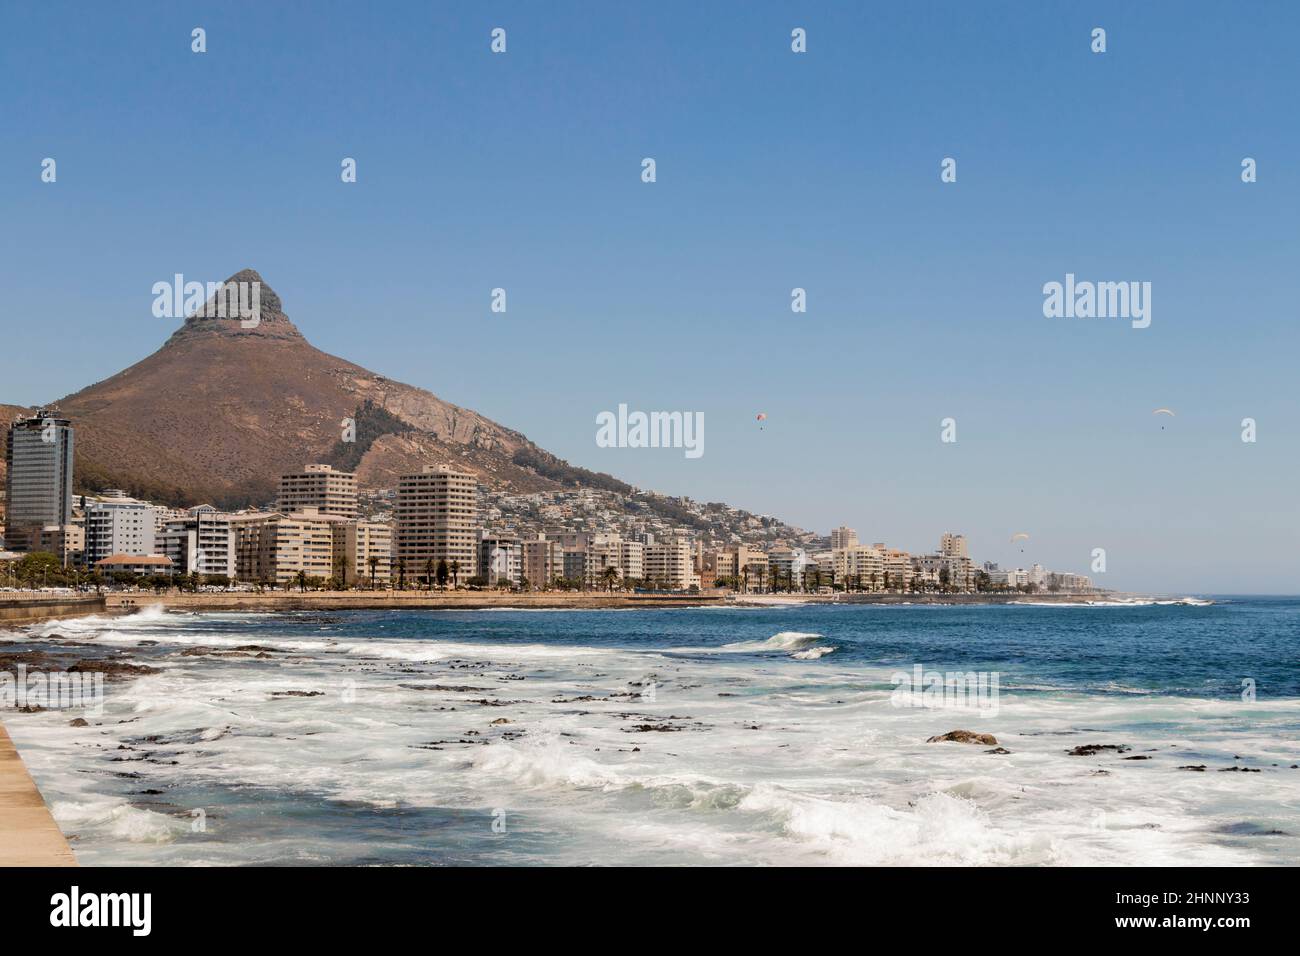 Waves and mountains, Sea Point, promenade Cape Town South Africa. Stock Photo